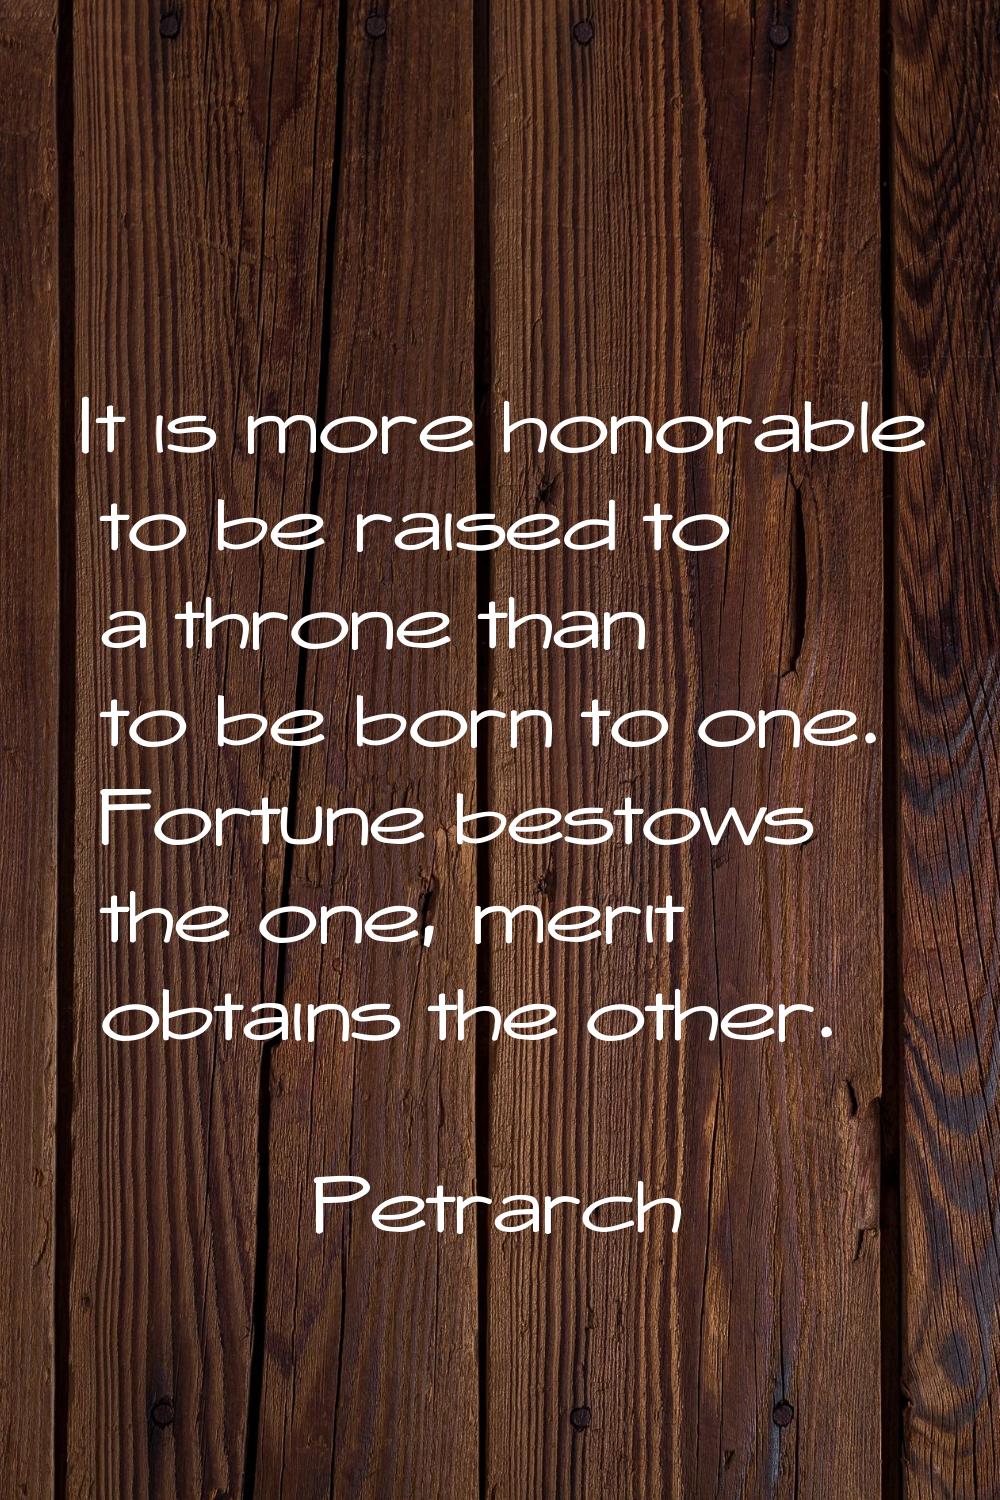 It is more honorable to be raised to a throne than to be born to one. Fortune bestows the one, meri